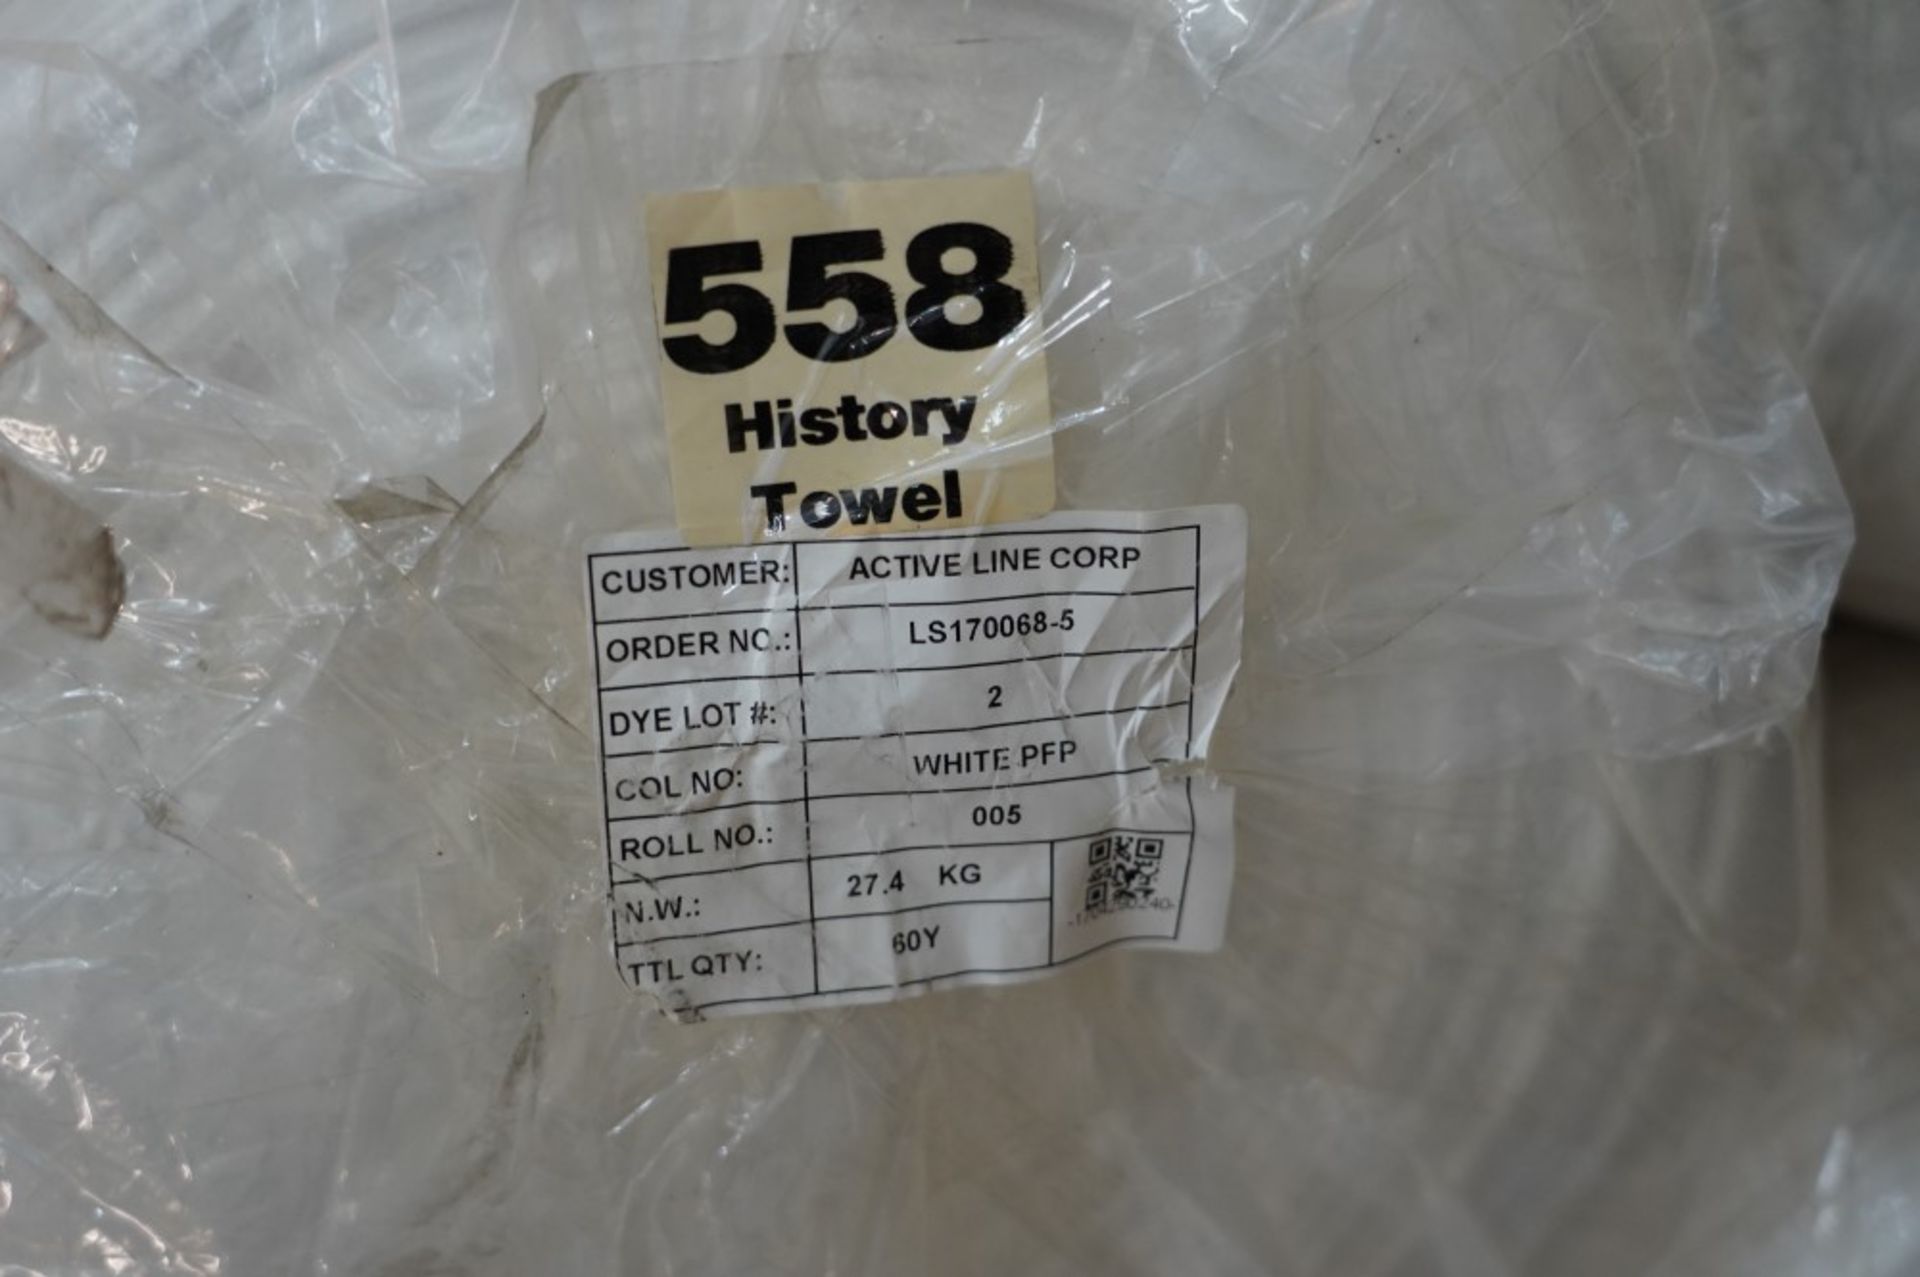 Active Line Corp (21) History Towel Fabric Rolls Model 558, White, PFP - Image 4 of 4